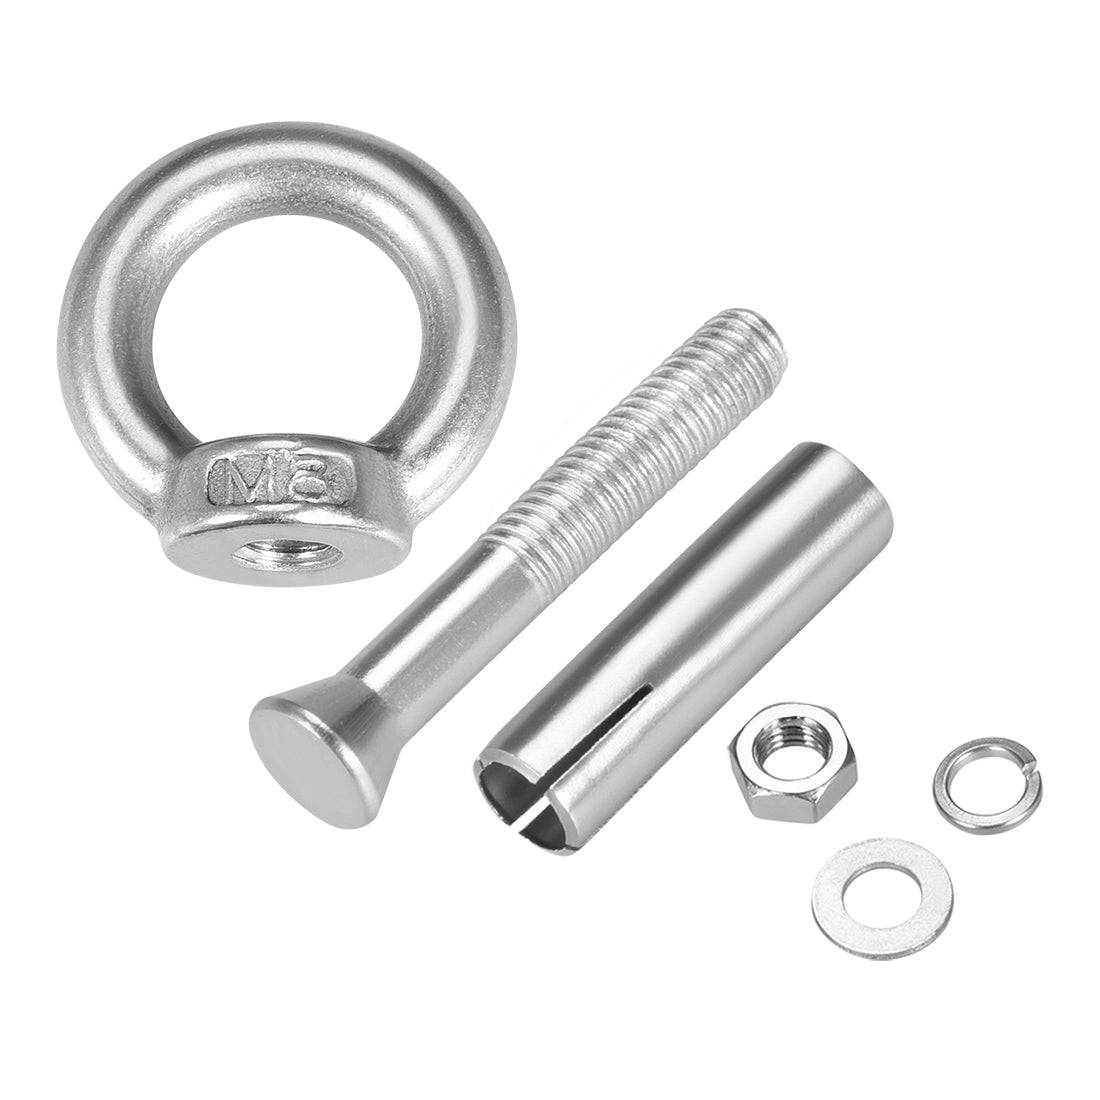 uxcell Uxcell M8 x 70 Expansion Eyebolt Eye Nut Screw with Ring Anchor Raw Bolts 2 Pcs